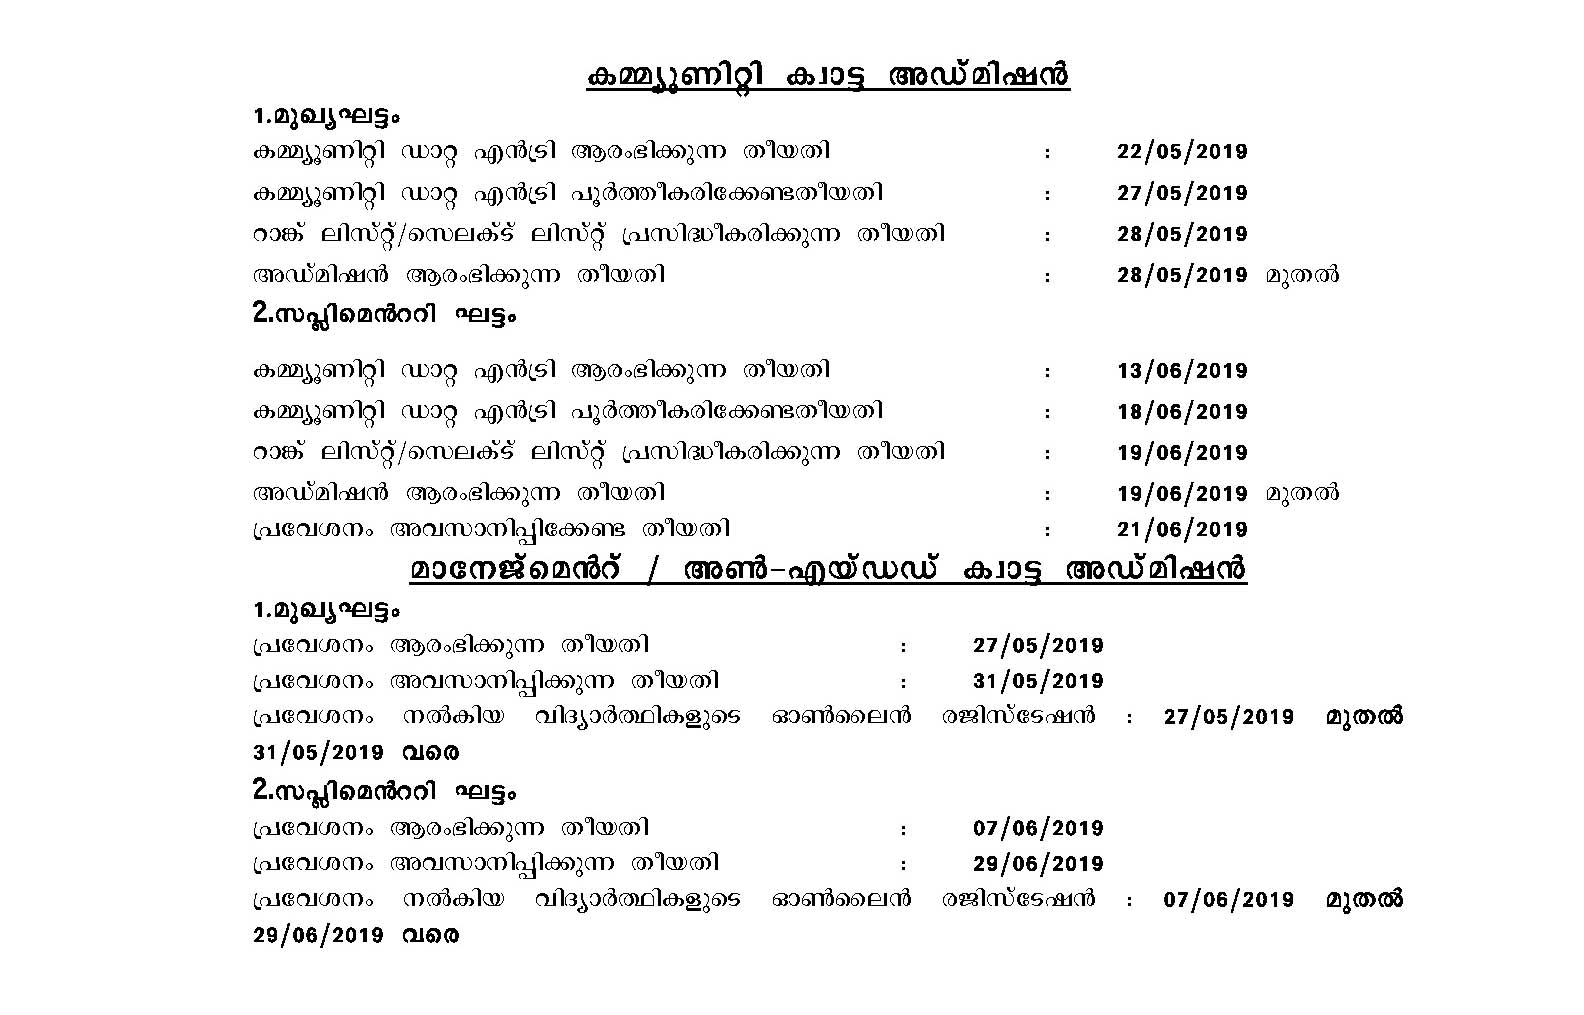 Plus 1 Seat Availability in Schools of Kerala for 2018 2019 Batch - Notification Image 10